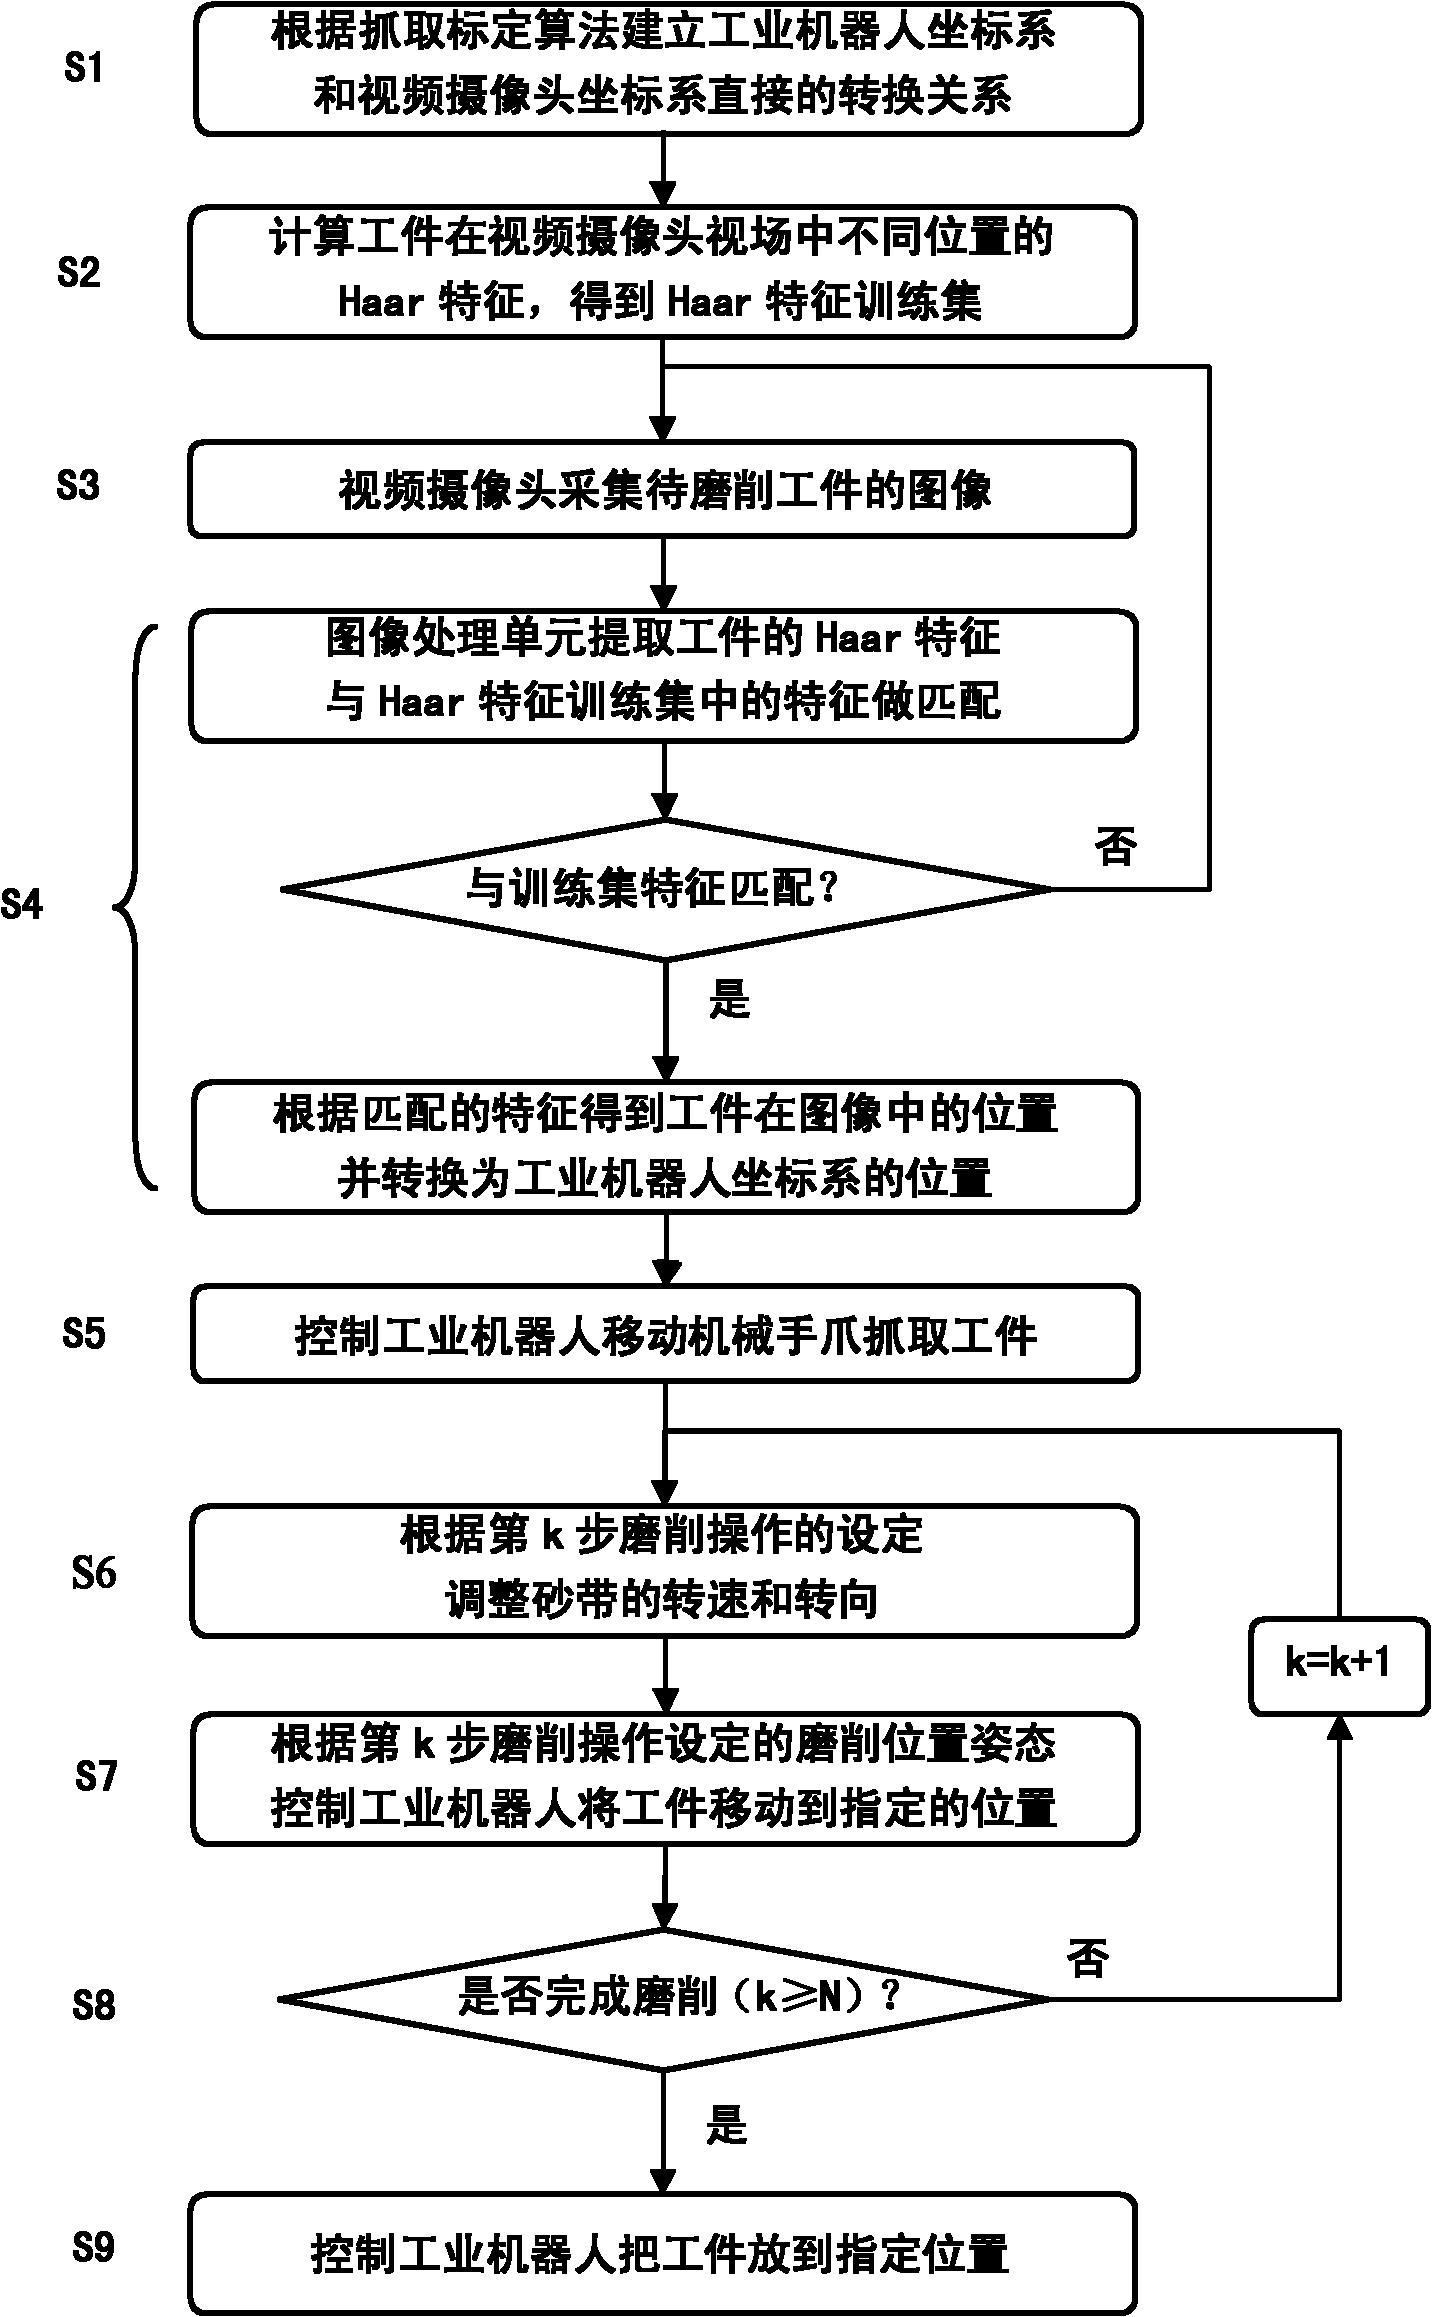 System and method for grinding industrial robot on basis of visual information